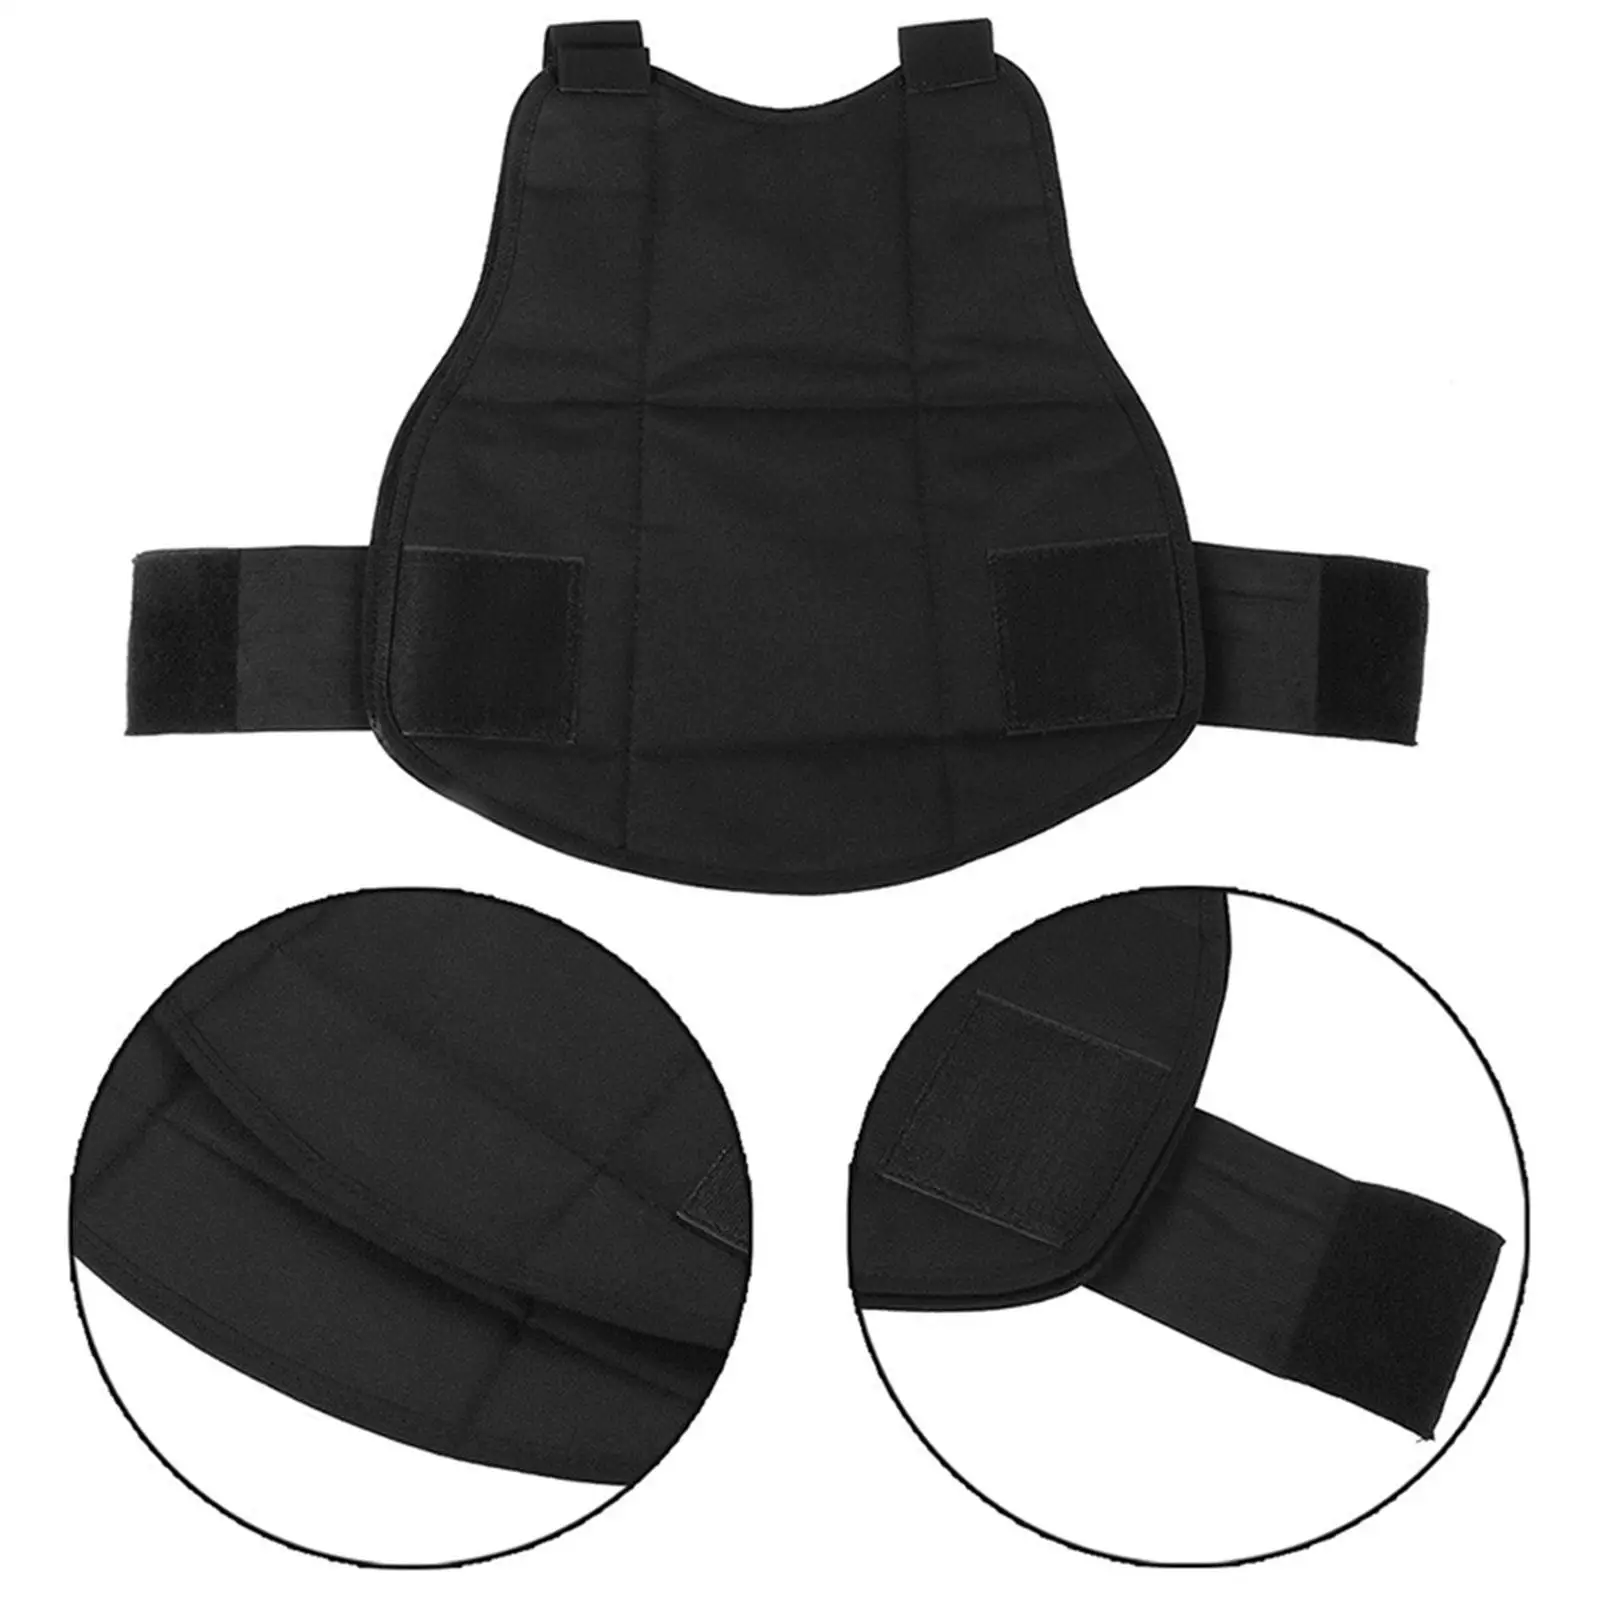 Breathable Outdoor Vest Clothing Nylon Adjustable Chest Protector for Sports